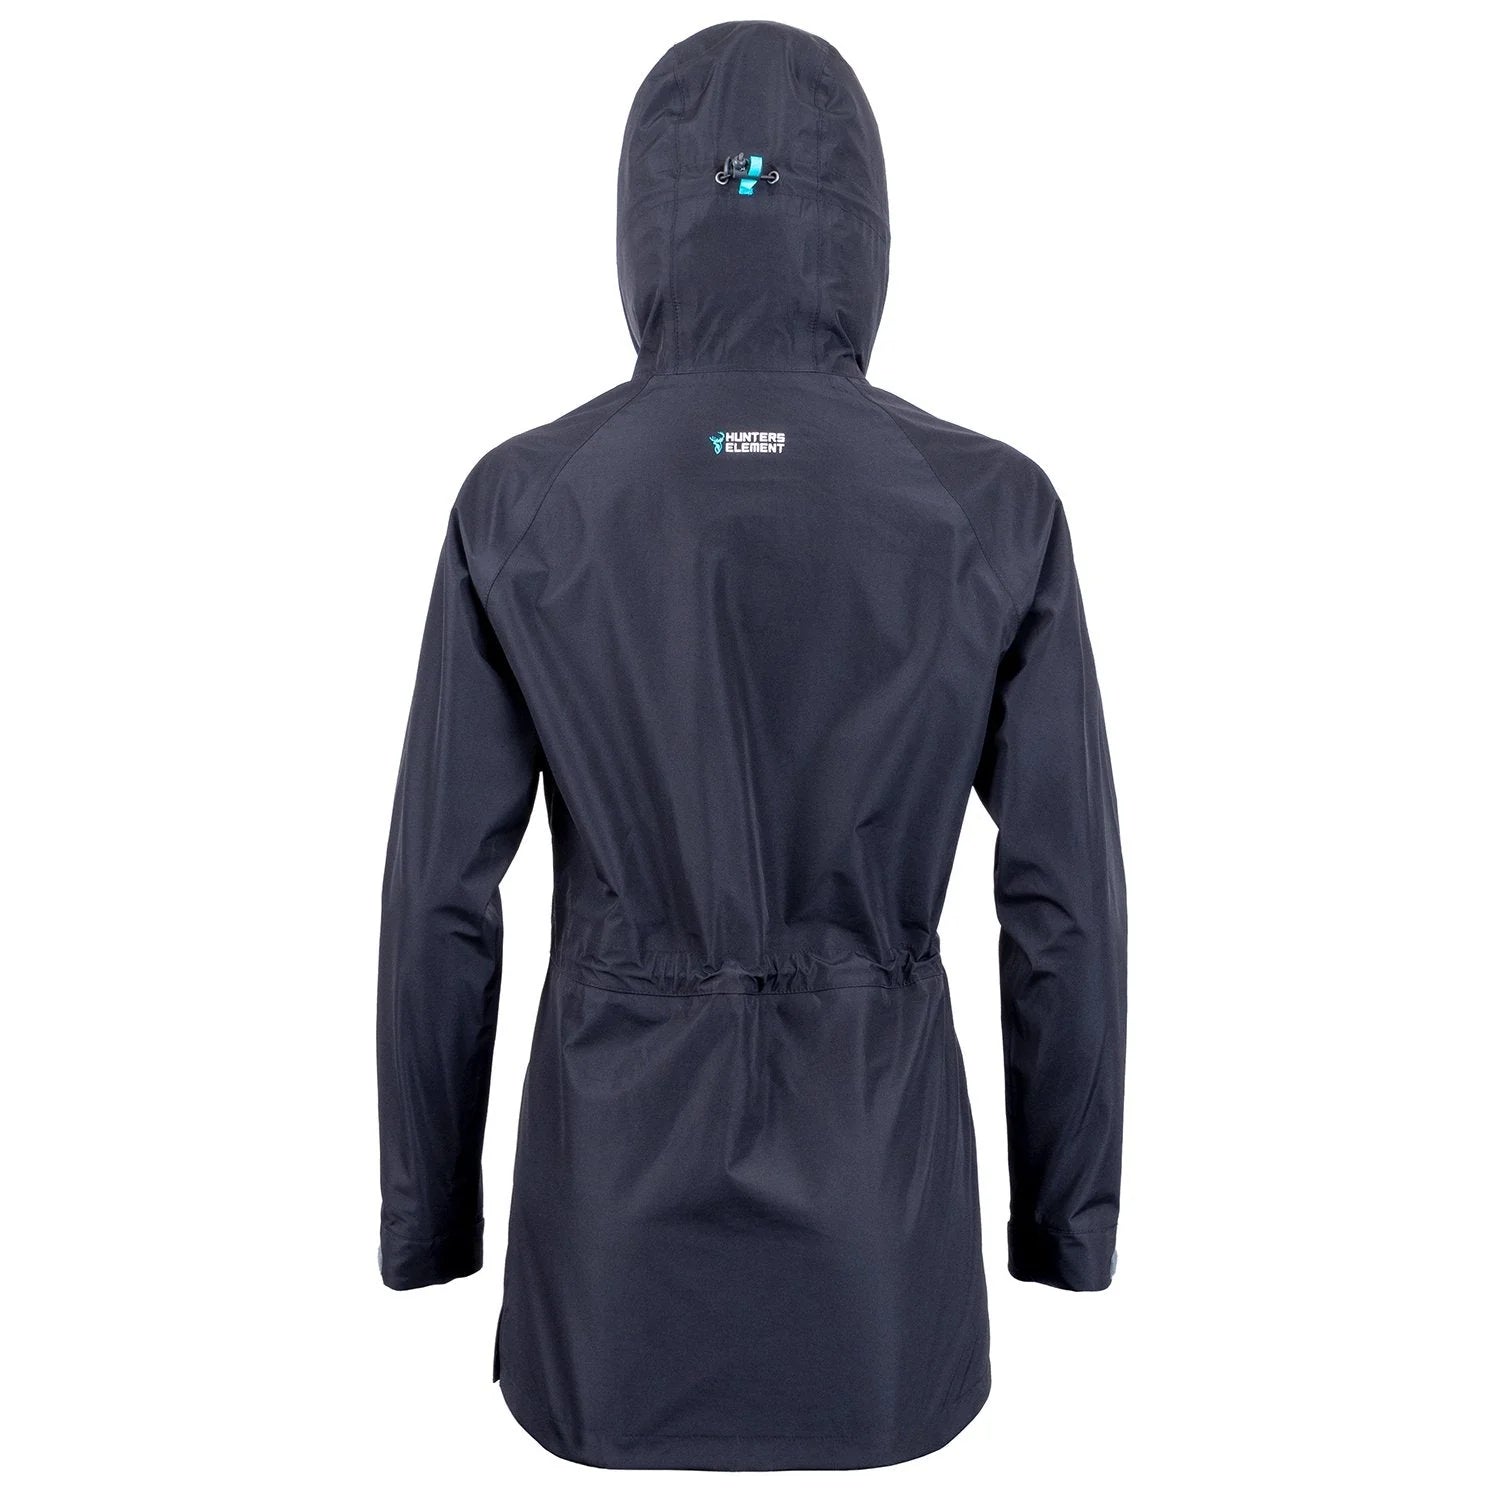 Bass Outdoor Full-Zip Hooded Jacket - Save 38%